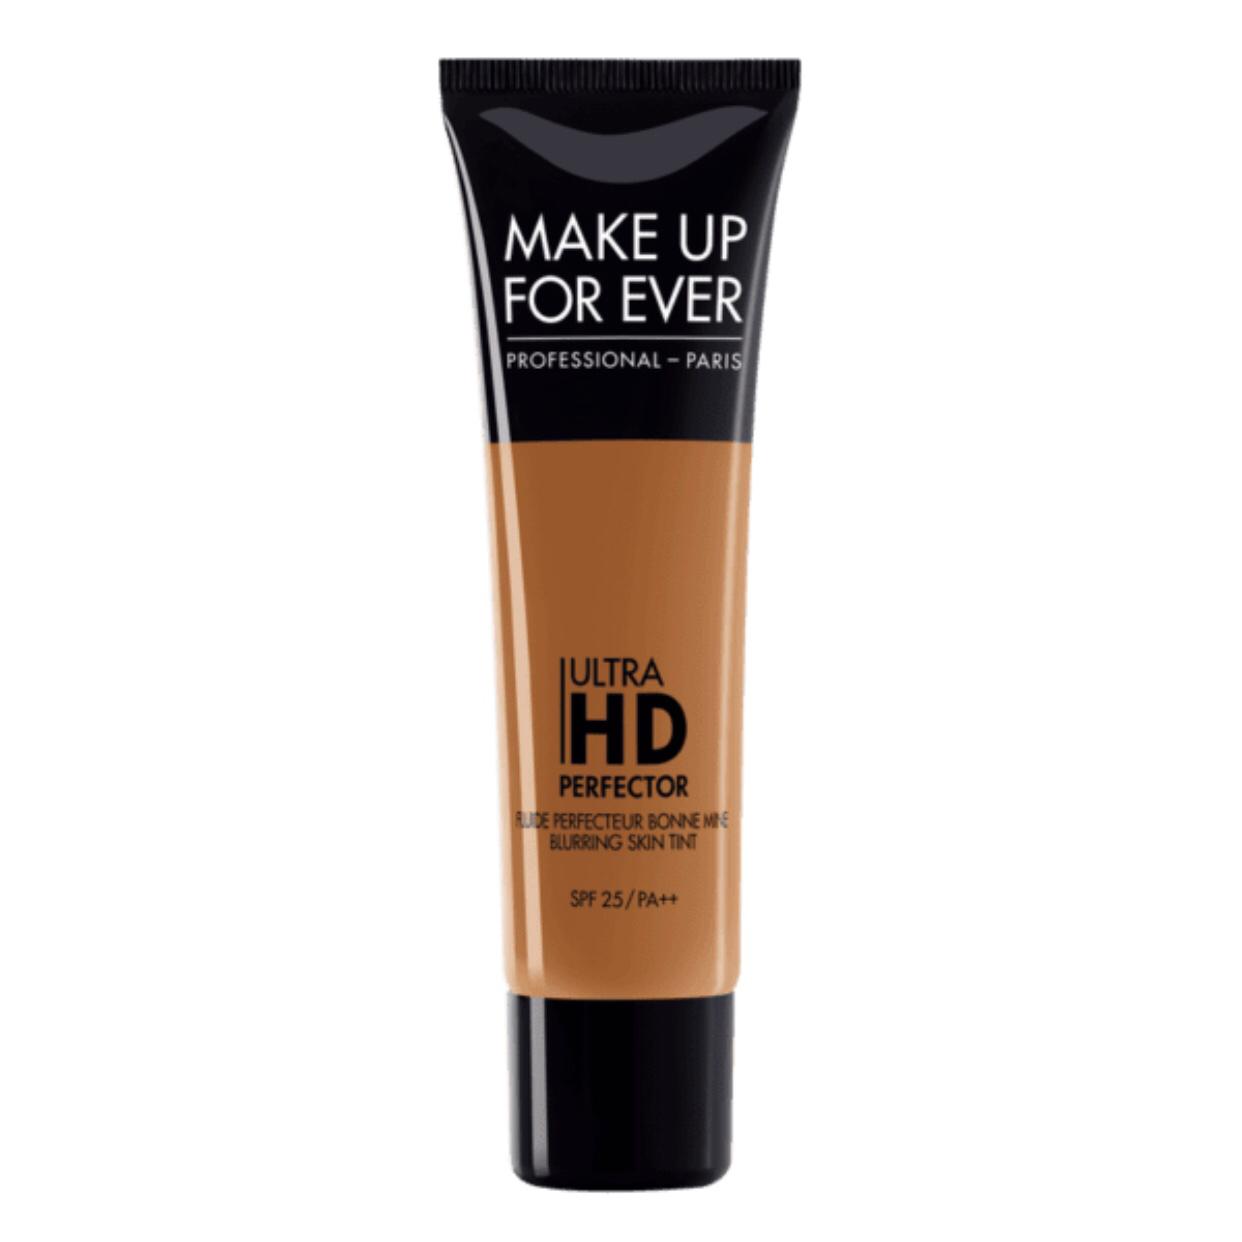 MAKE UP FOR EVER - Ultra HD Perfector SPF 25 | 30 mL